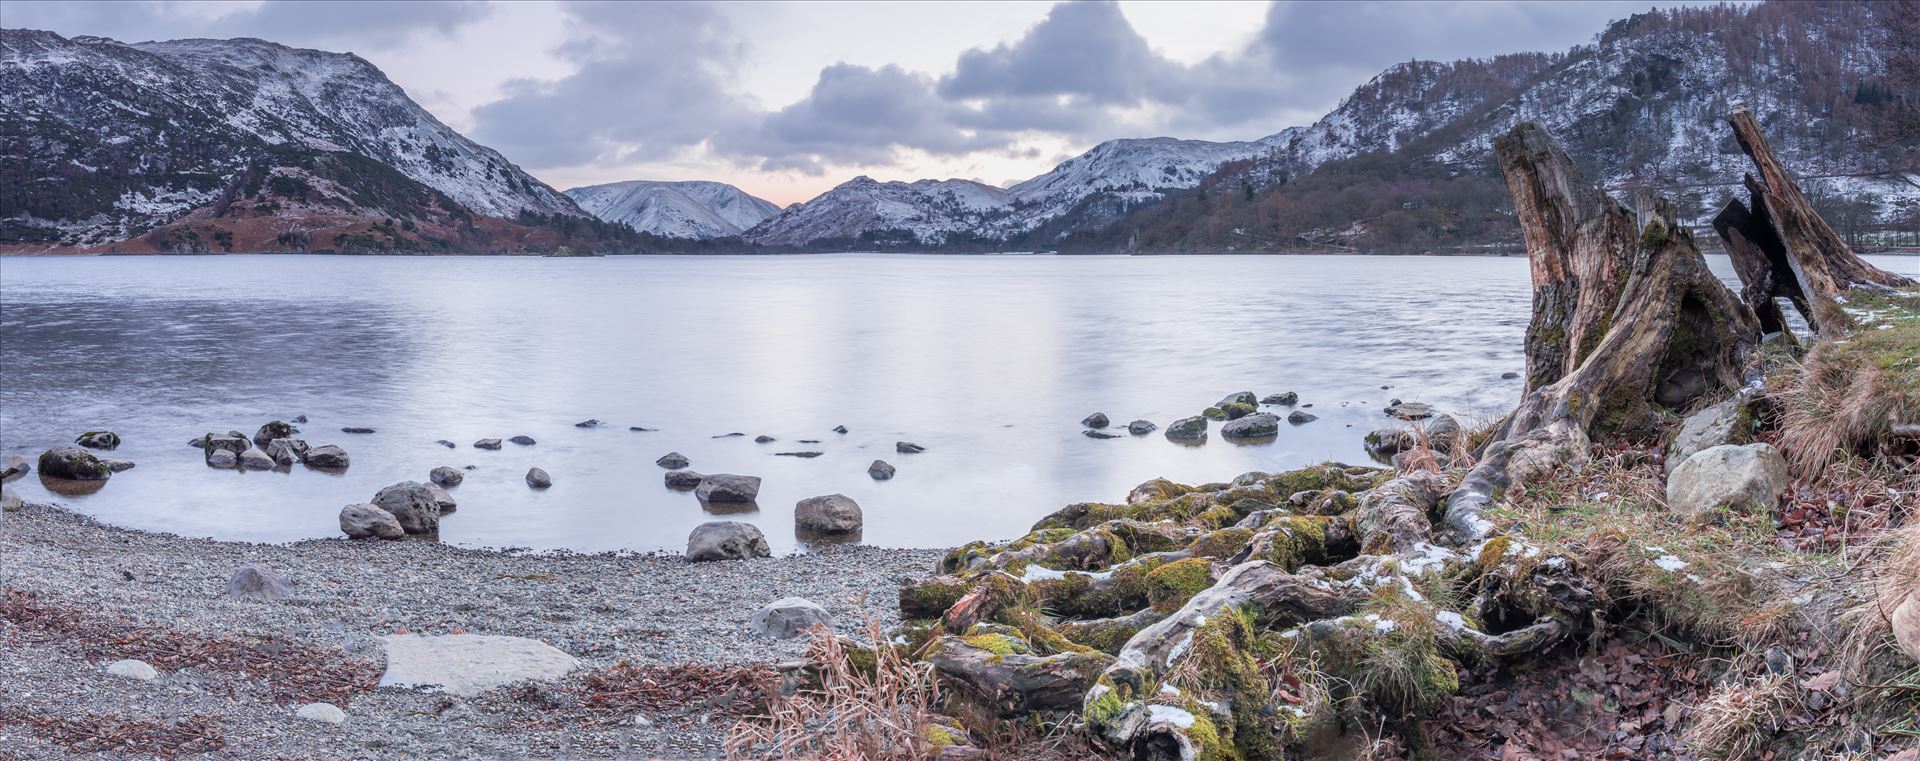 Ullswater at sunset This is 6 separate shots stitched together to create a panoramic shot of the beautiful lake Ullswater. by philreay